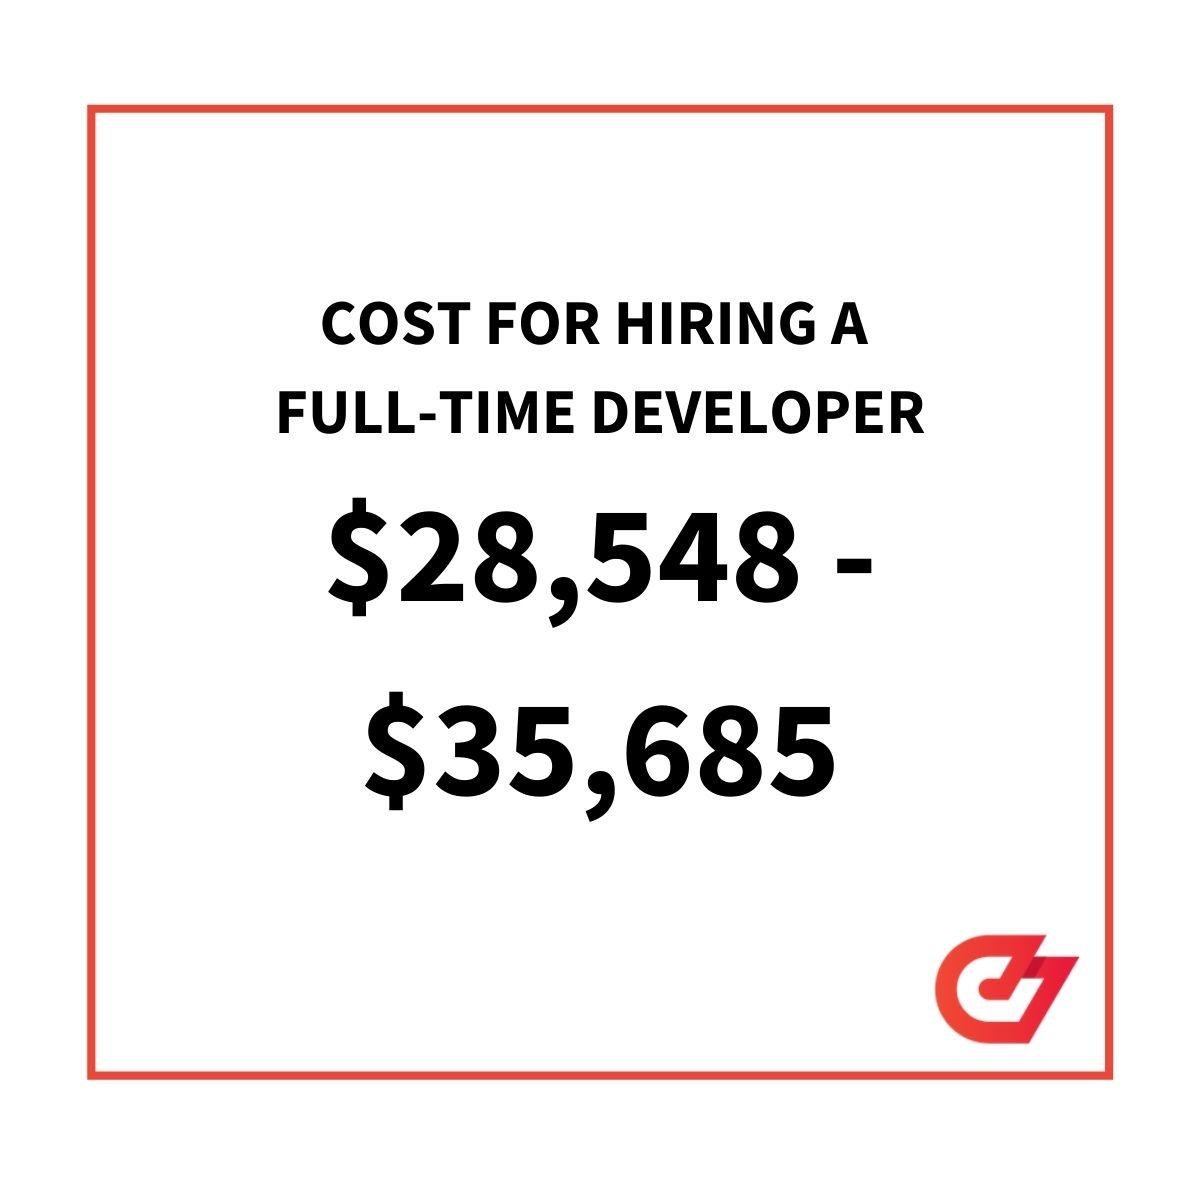 On average, it costs between $28,000 and $35,000 to hire a software dev in 2021